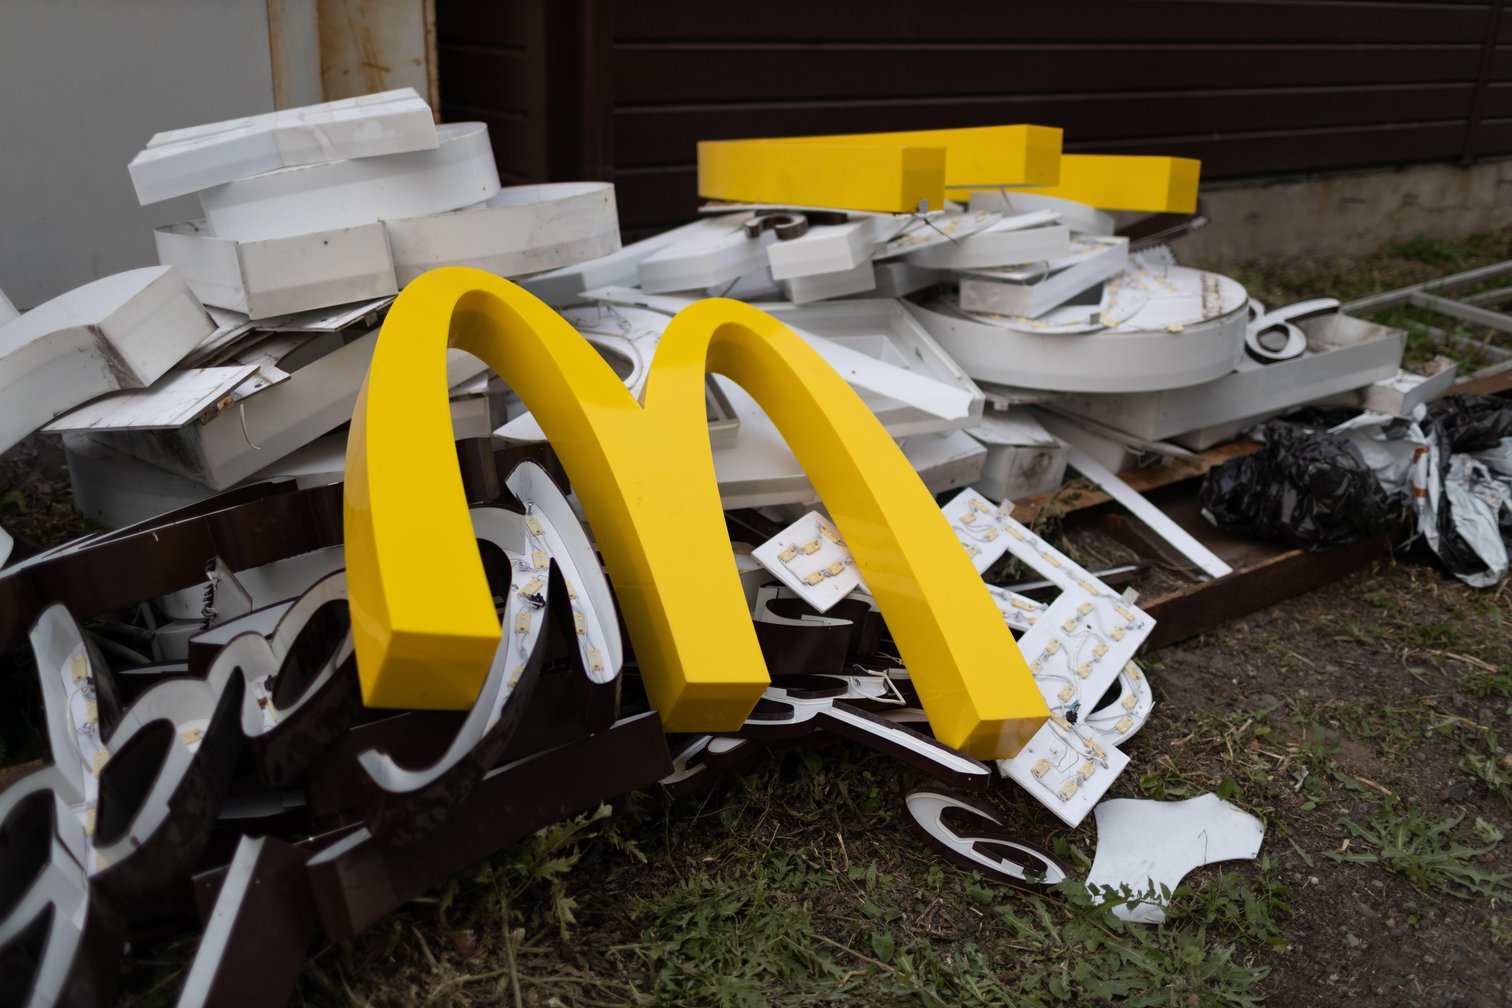 'The weaponisation of everything': McDonald's has pulled out of Russia | Zoonar GmbH / Alamy Stock Photo